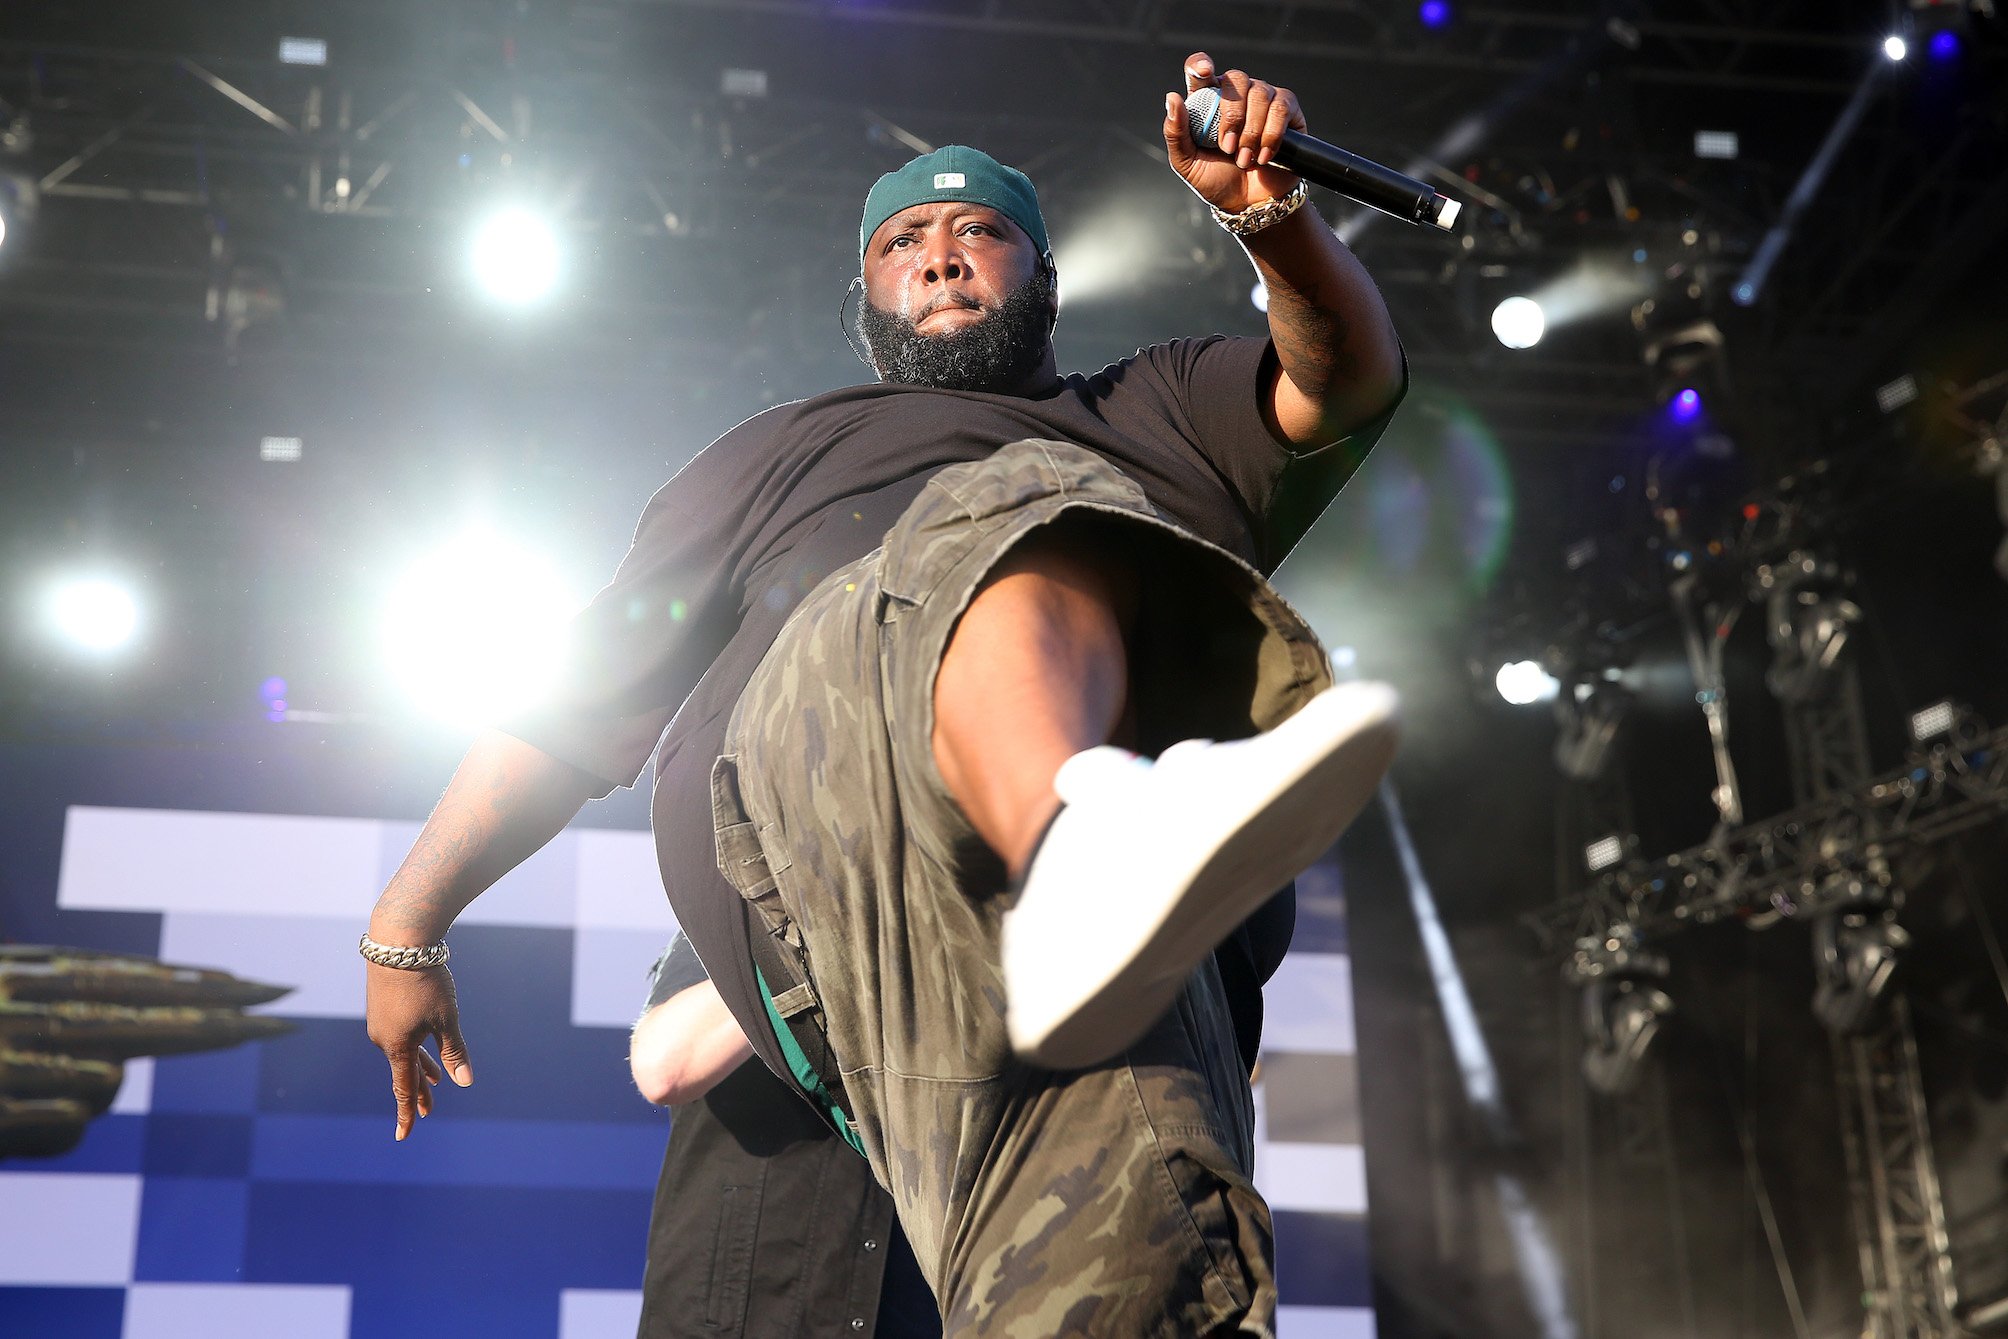 Killer Mike of Run the Jewels on stage performing with one leg lifted. Killer Mike is joining the 'Ozark' Season 4 cast